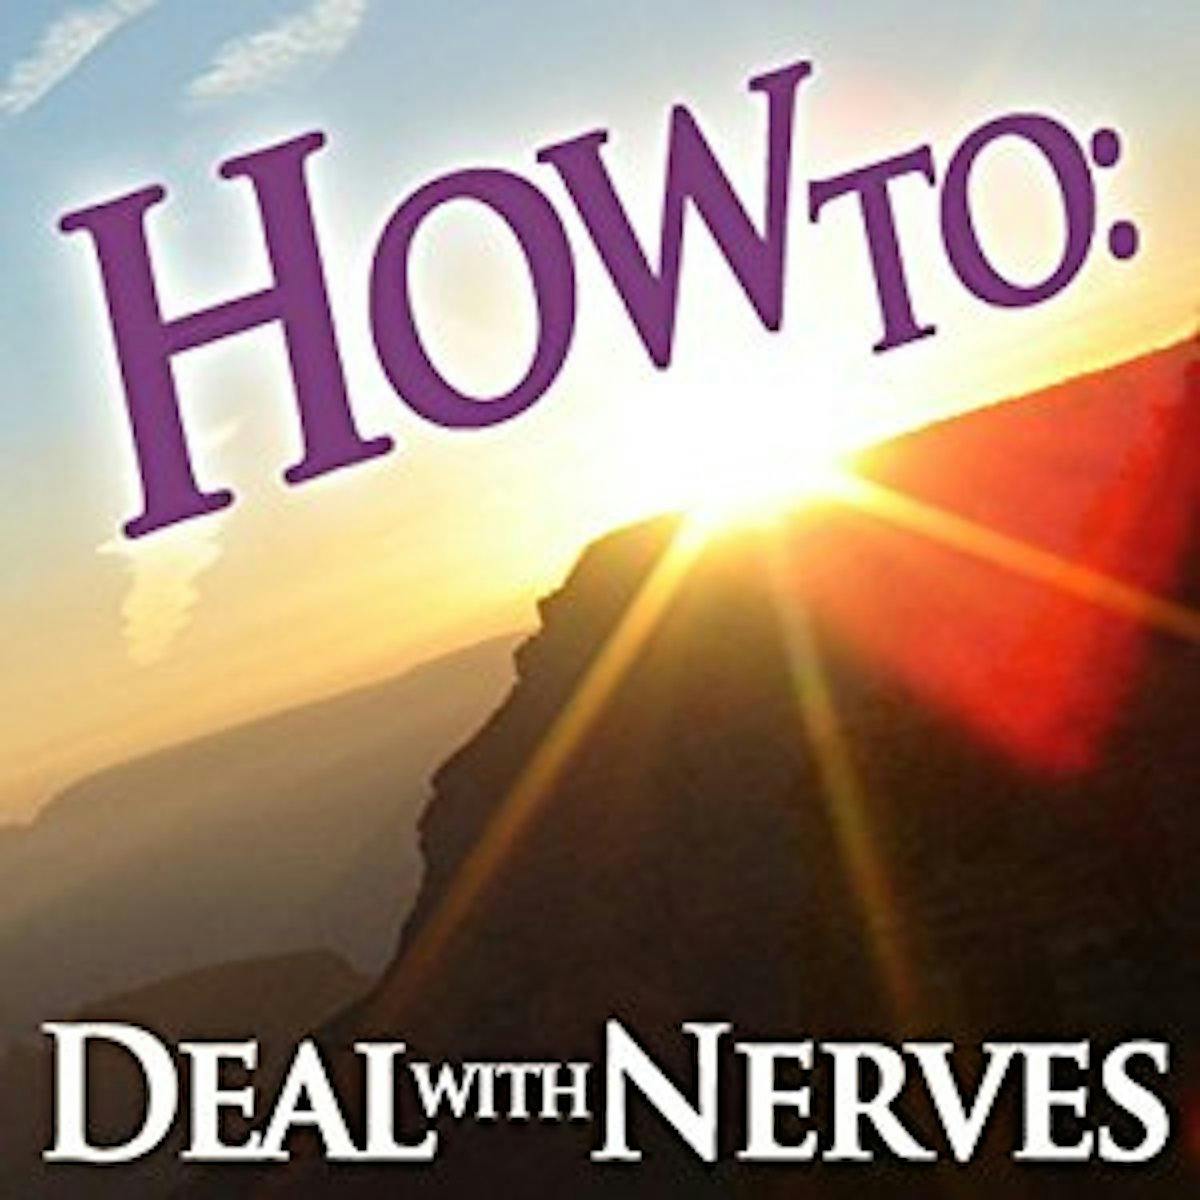 How To: Deal With Nerves - undefined